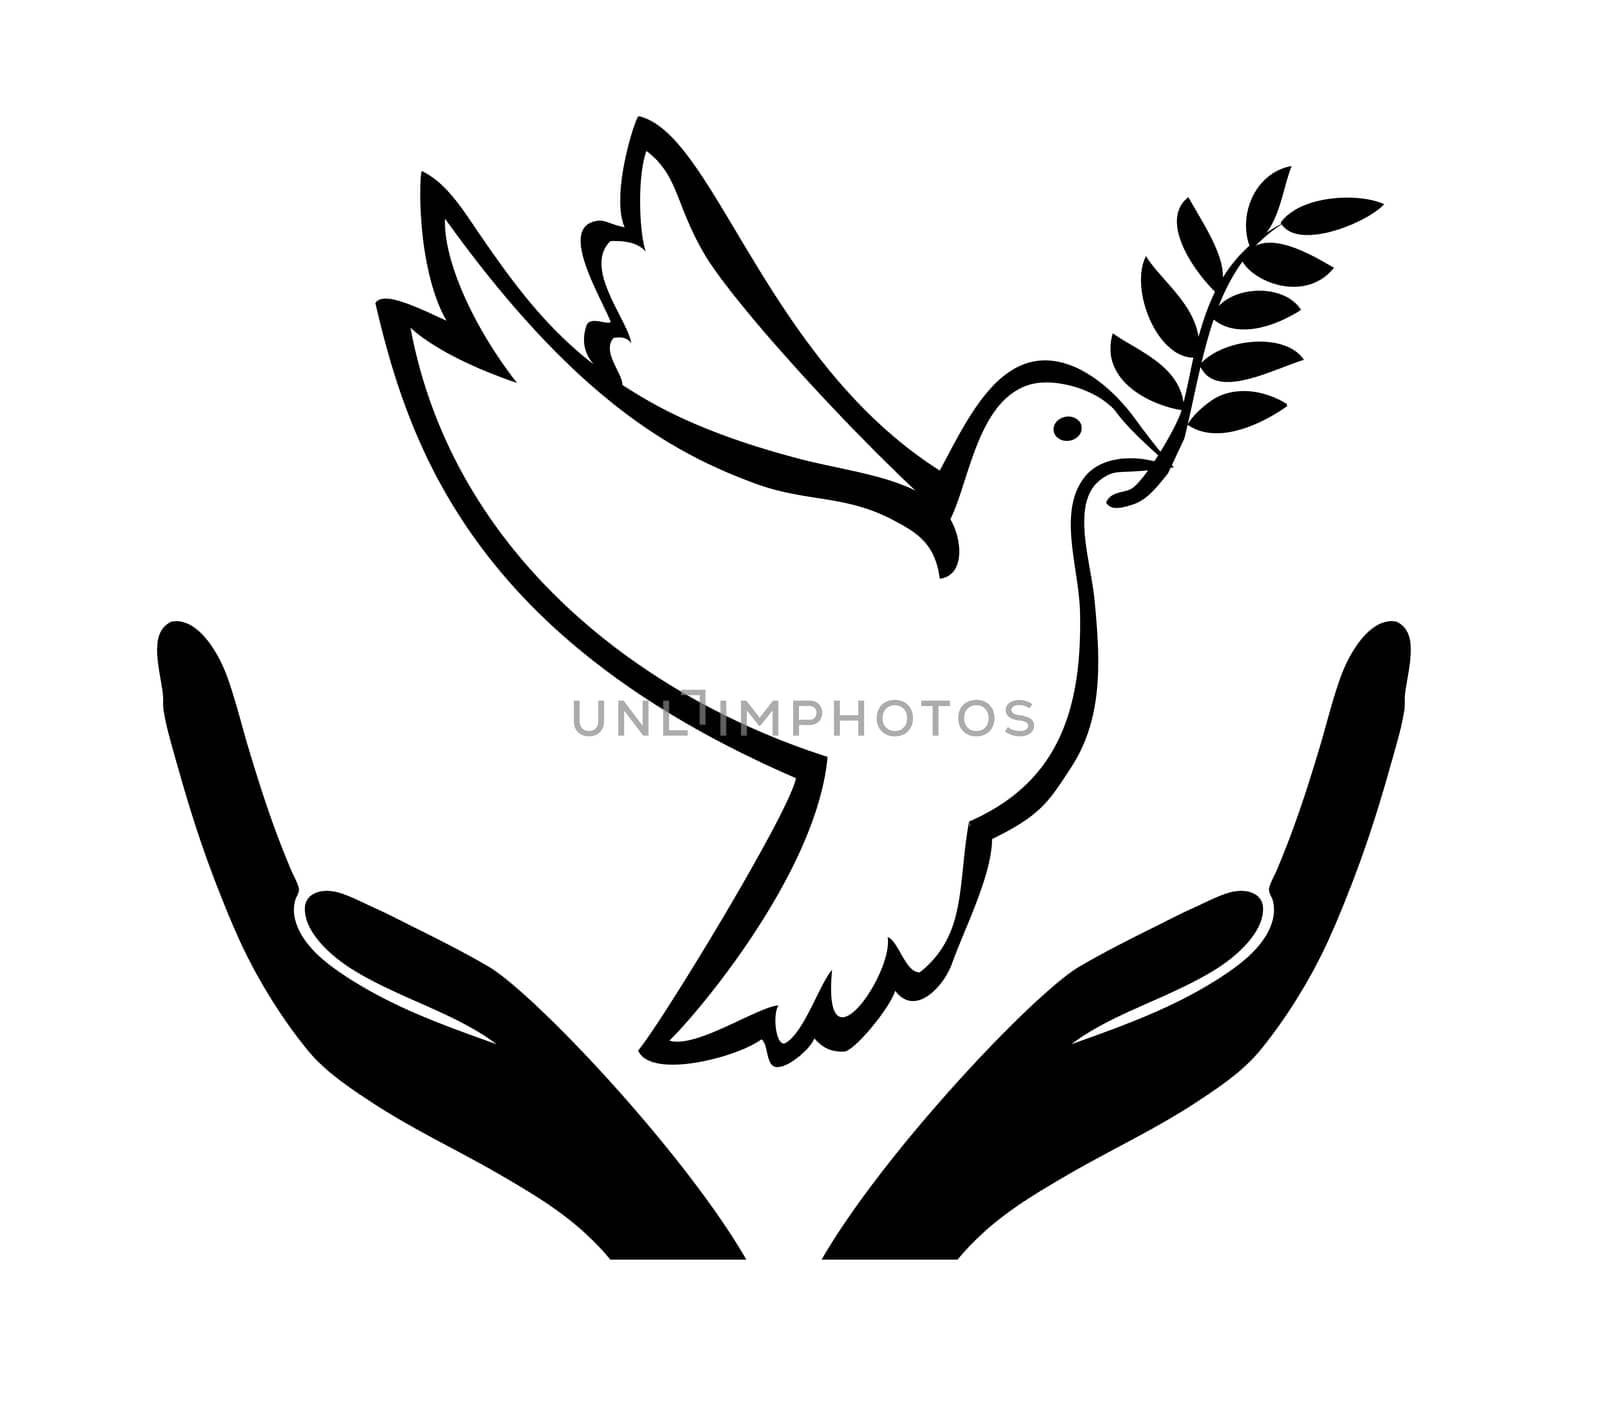 Peace Offer Concept by Bambara